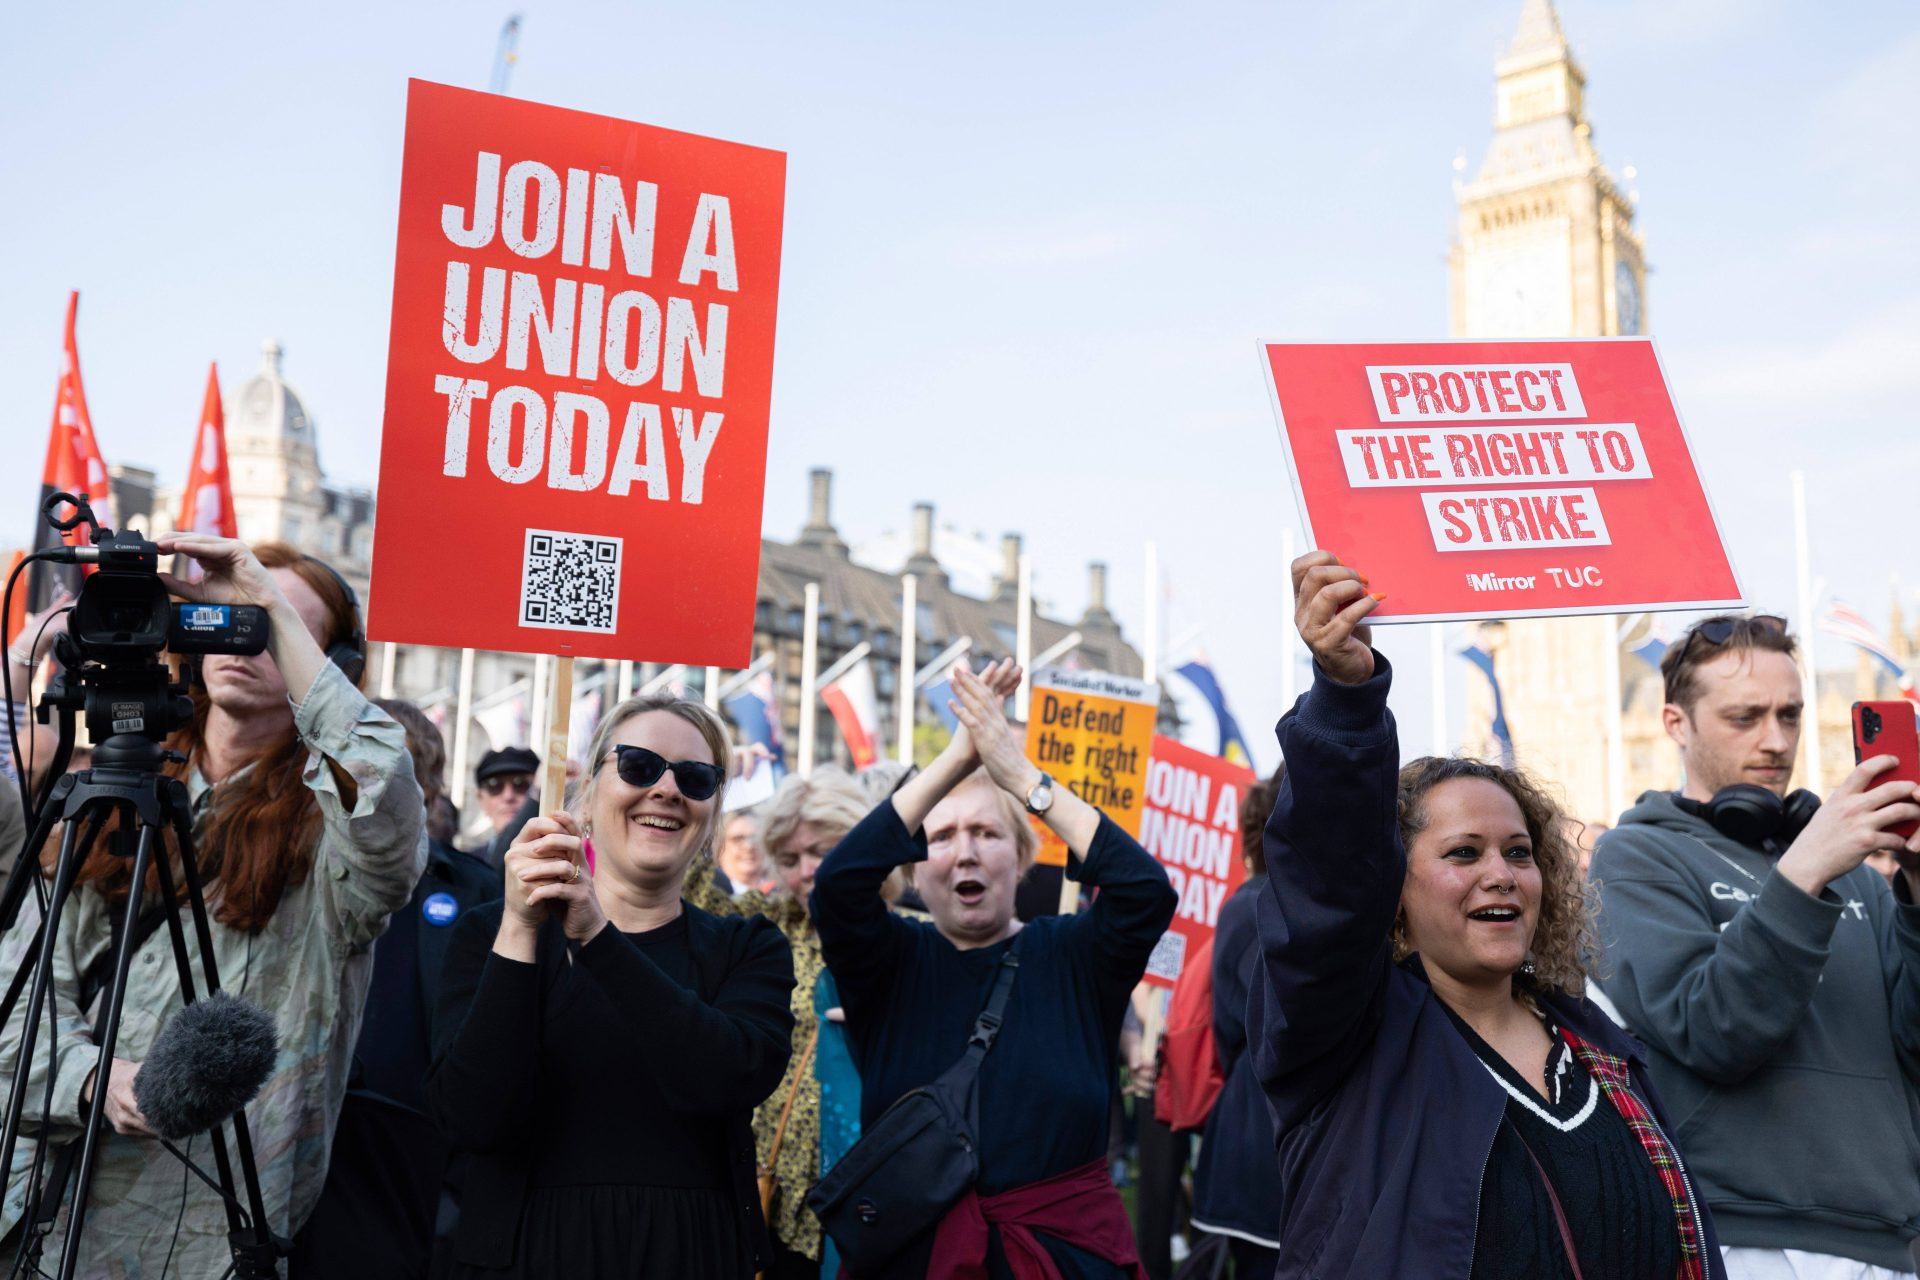 A group of protesters at Parliament Square in London holding placards with the slogans "Join a Union Today" and "Protect The Right to Strike".